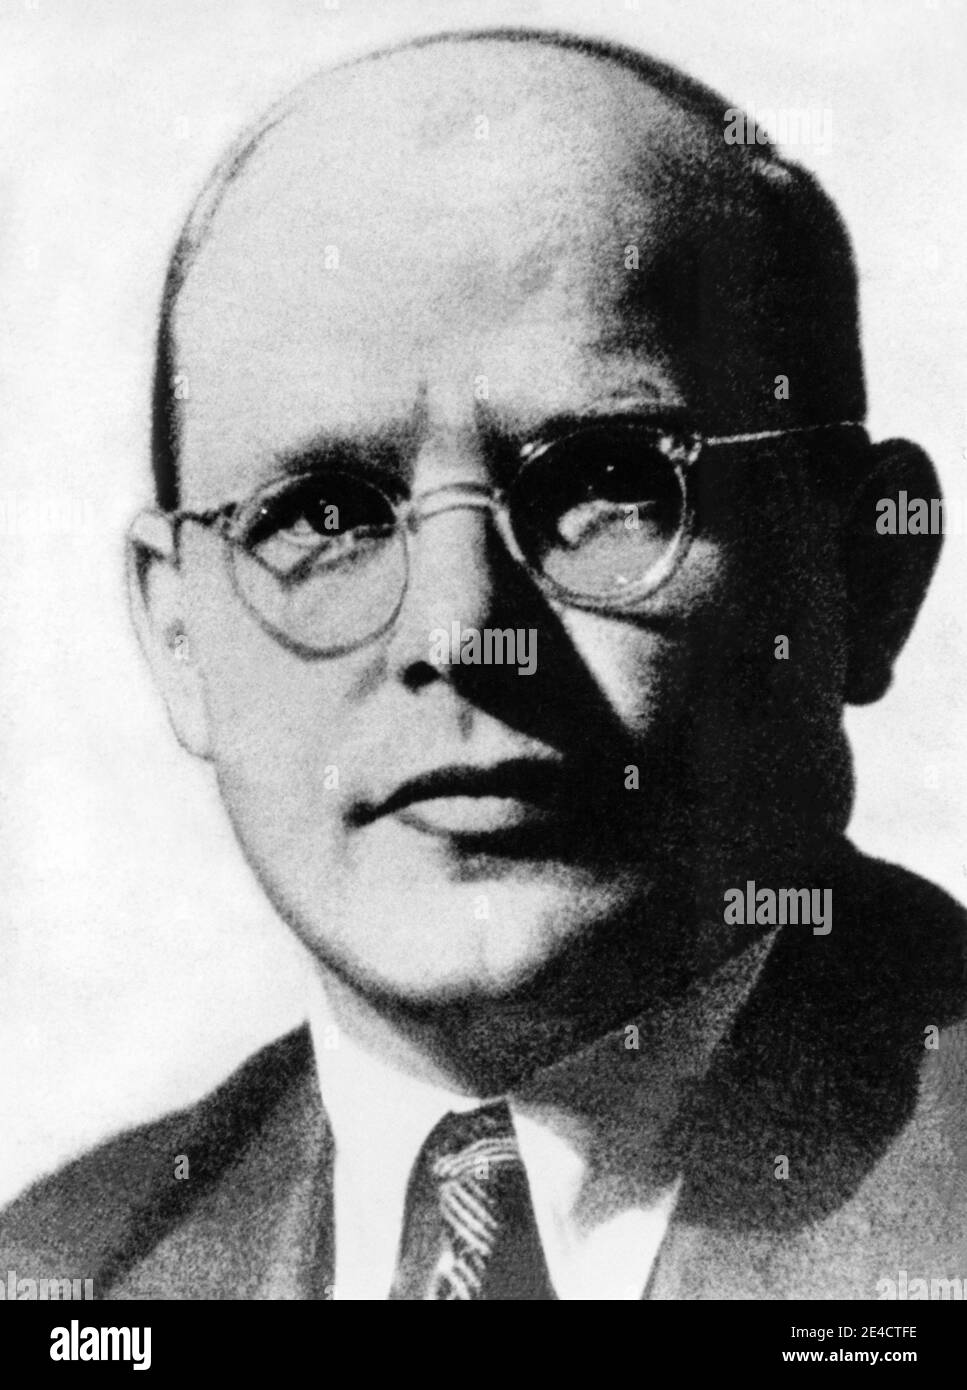 Portrait of Dietrich Bonhoeffer (1906-1945), German Christian pastor, theologian, anti-Nazi dissident, and key founding member of the Confessing Church. Bonhoeffer was arrested in April 1943 by the Gestapo and imprisoned at Tegel prison. Later he was transferred to Flossenbürg concentration camp before being executed by the Nazis for accusations of plotting to assassinate Adolf Hitler. Stock Photo